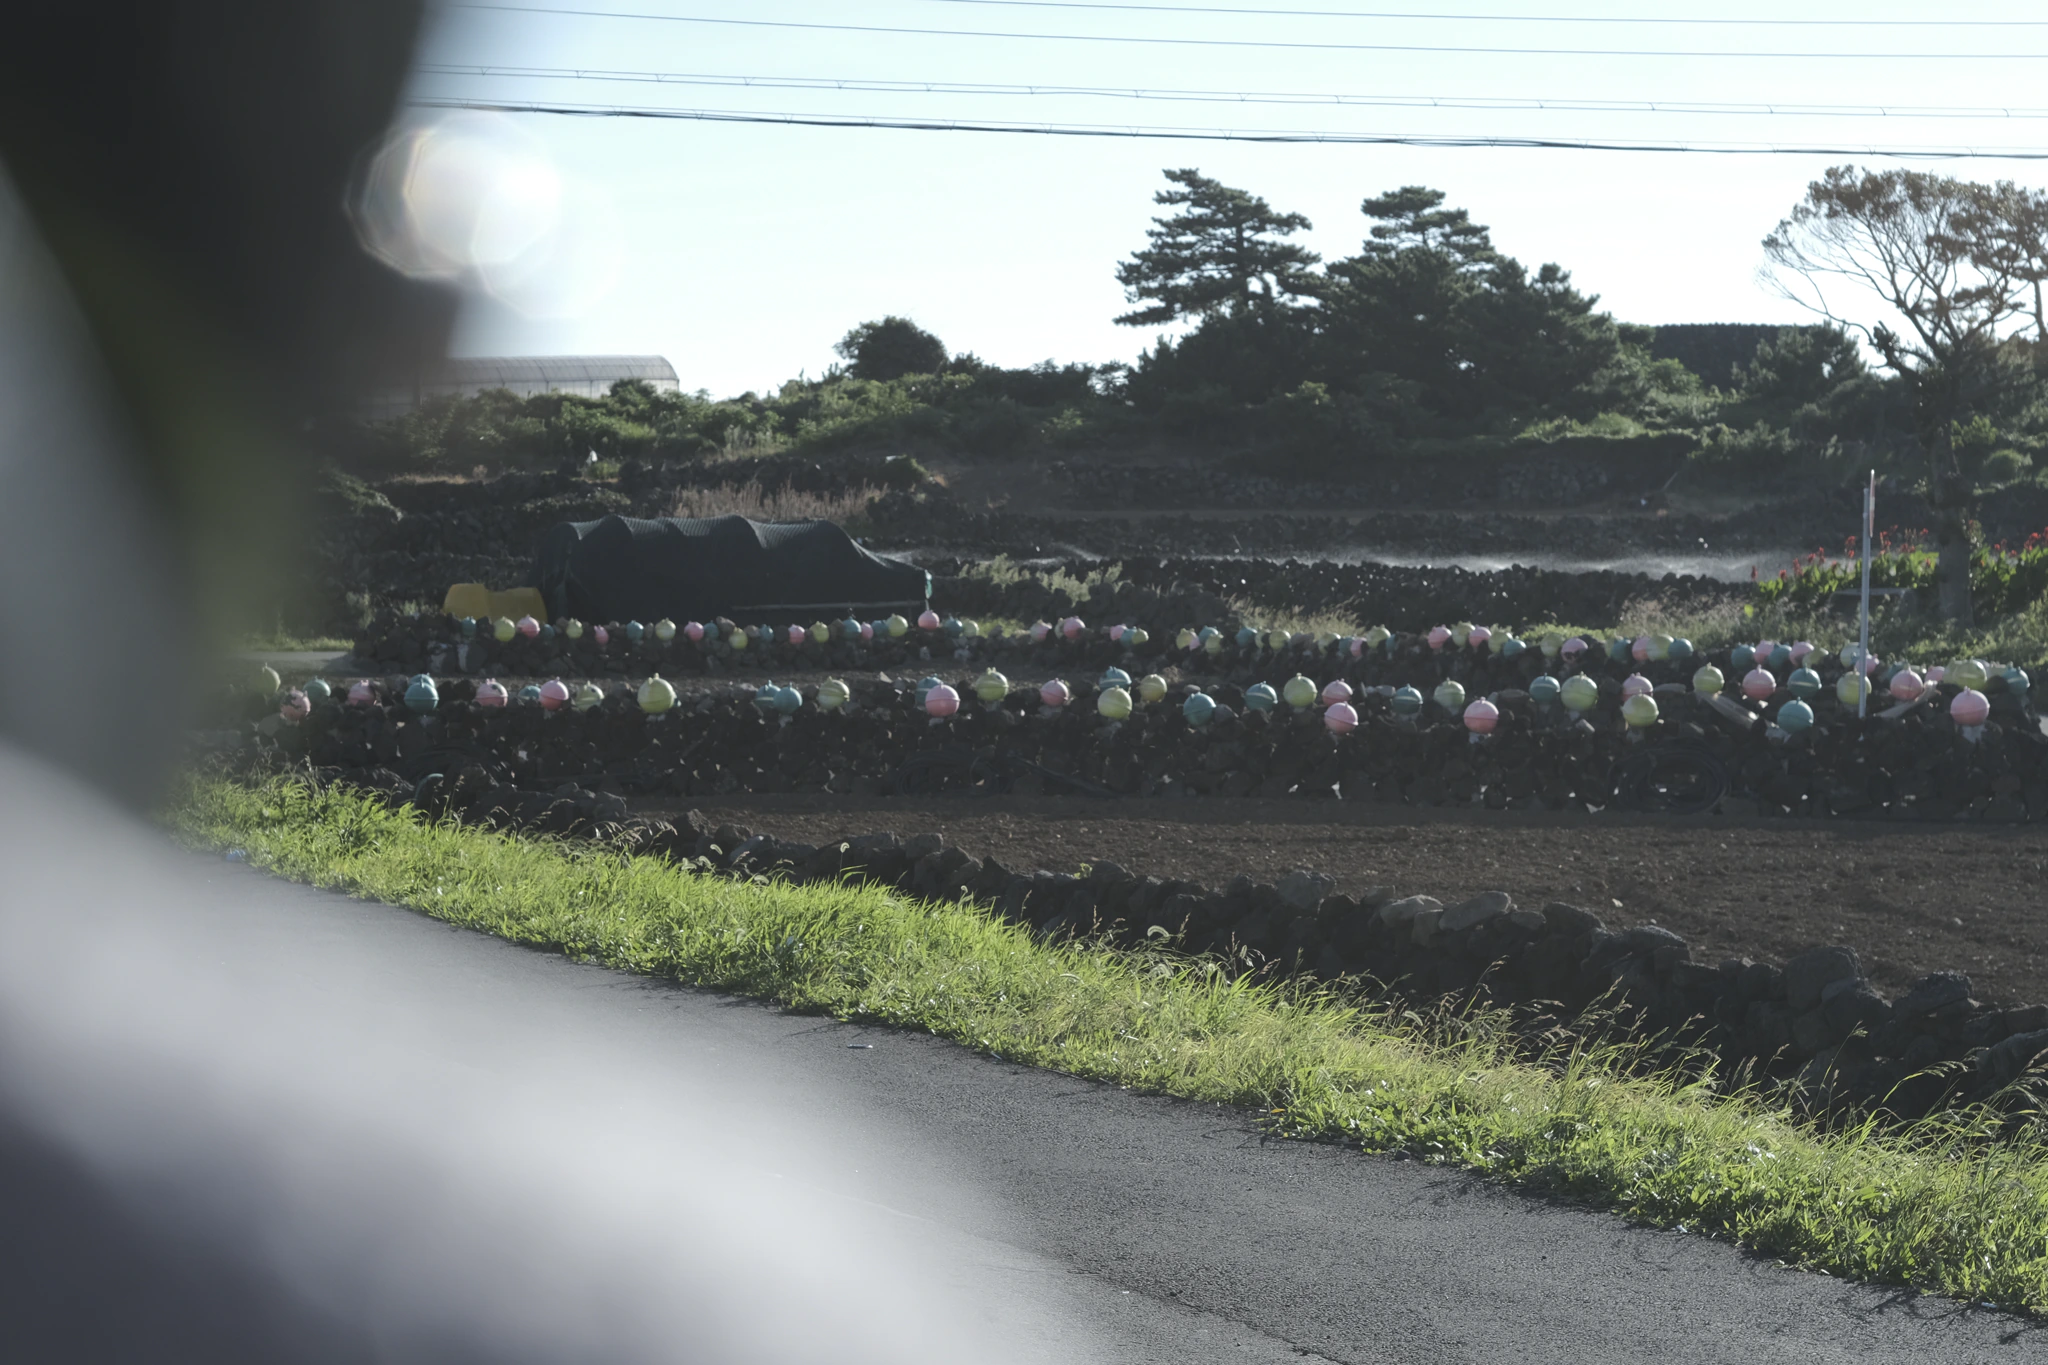 Fenced off farms in Jeju.